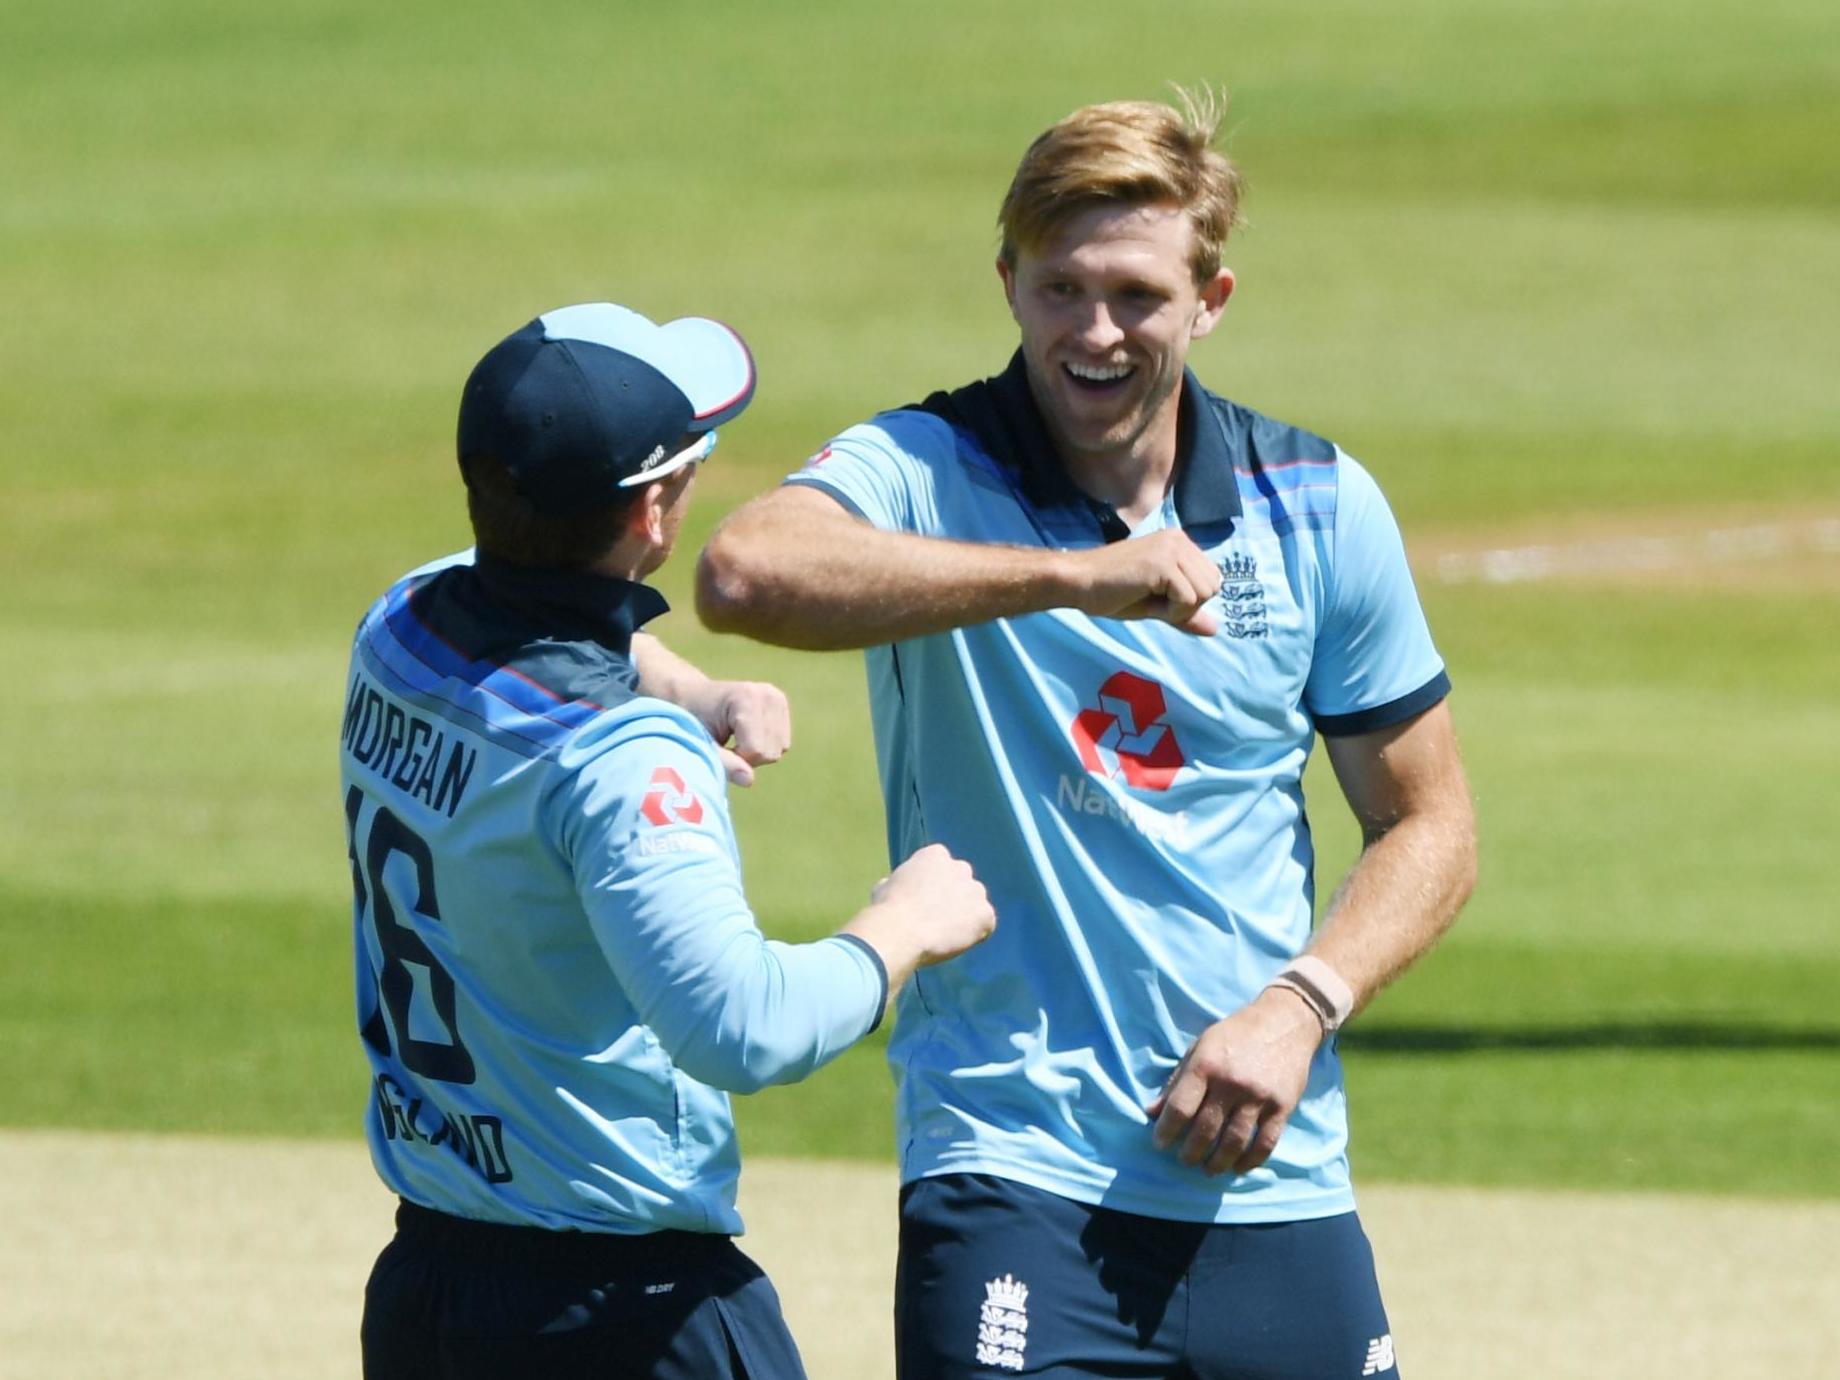 David Willey leads England to win over Ireland in first ODI